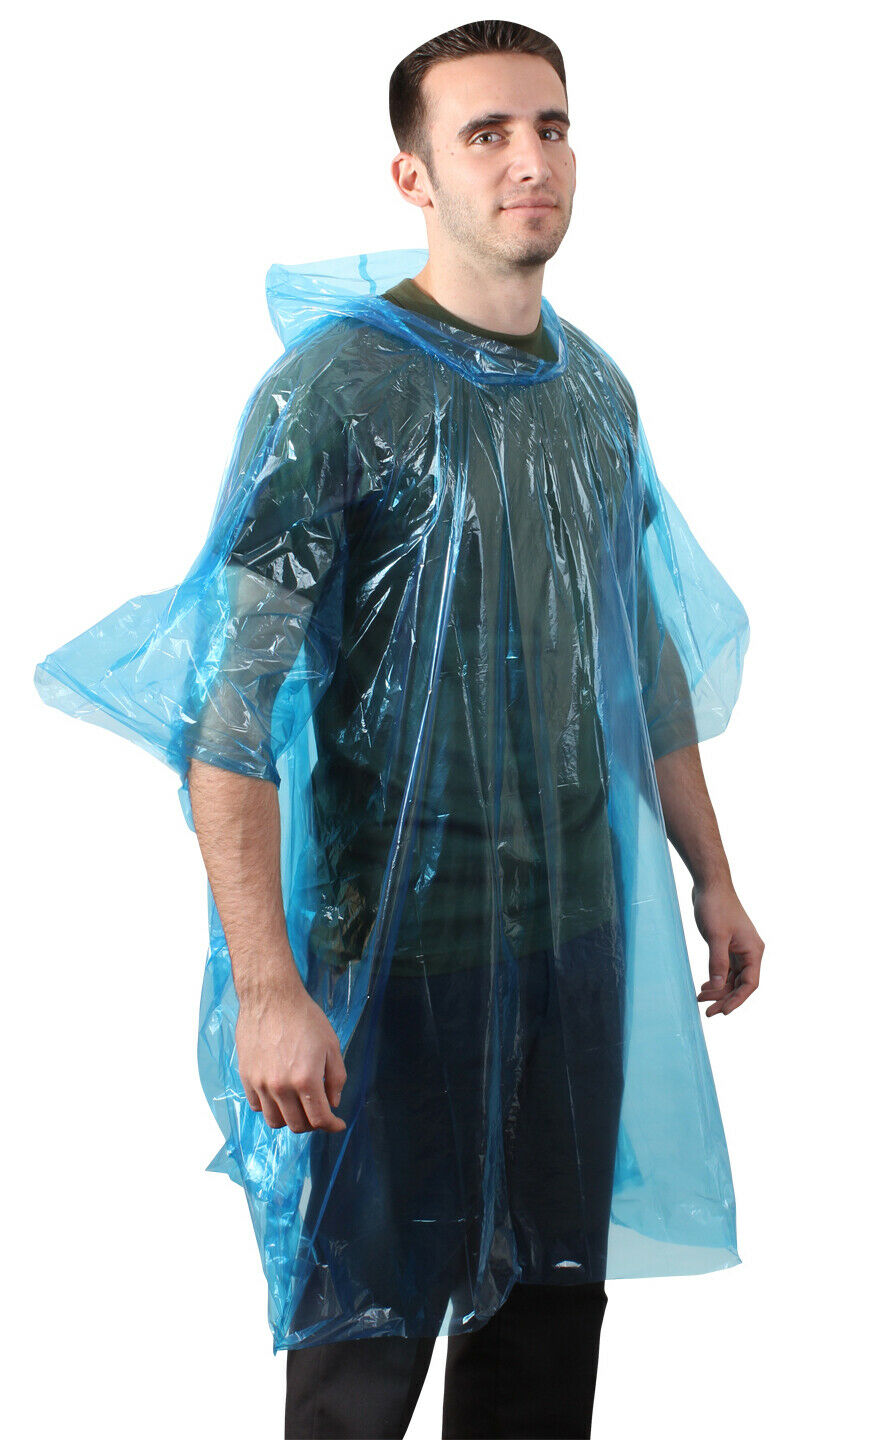 20 Pack Rothco All Weather Emergency Poncho